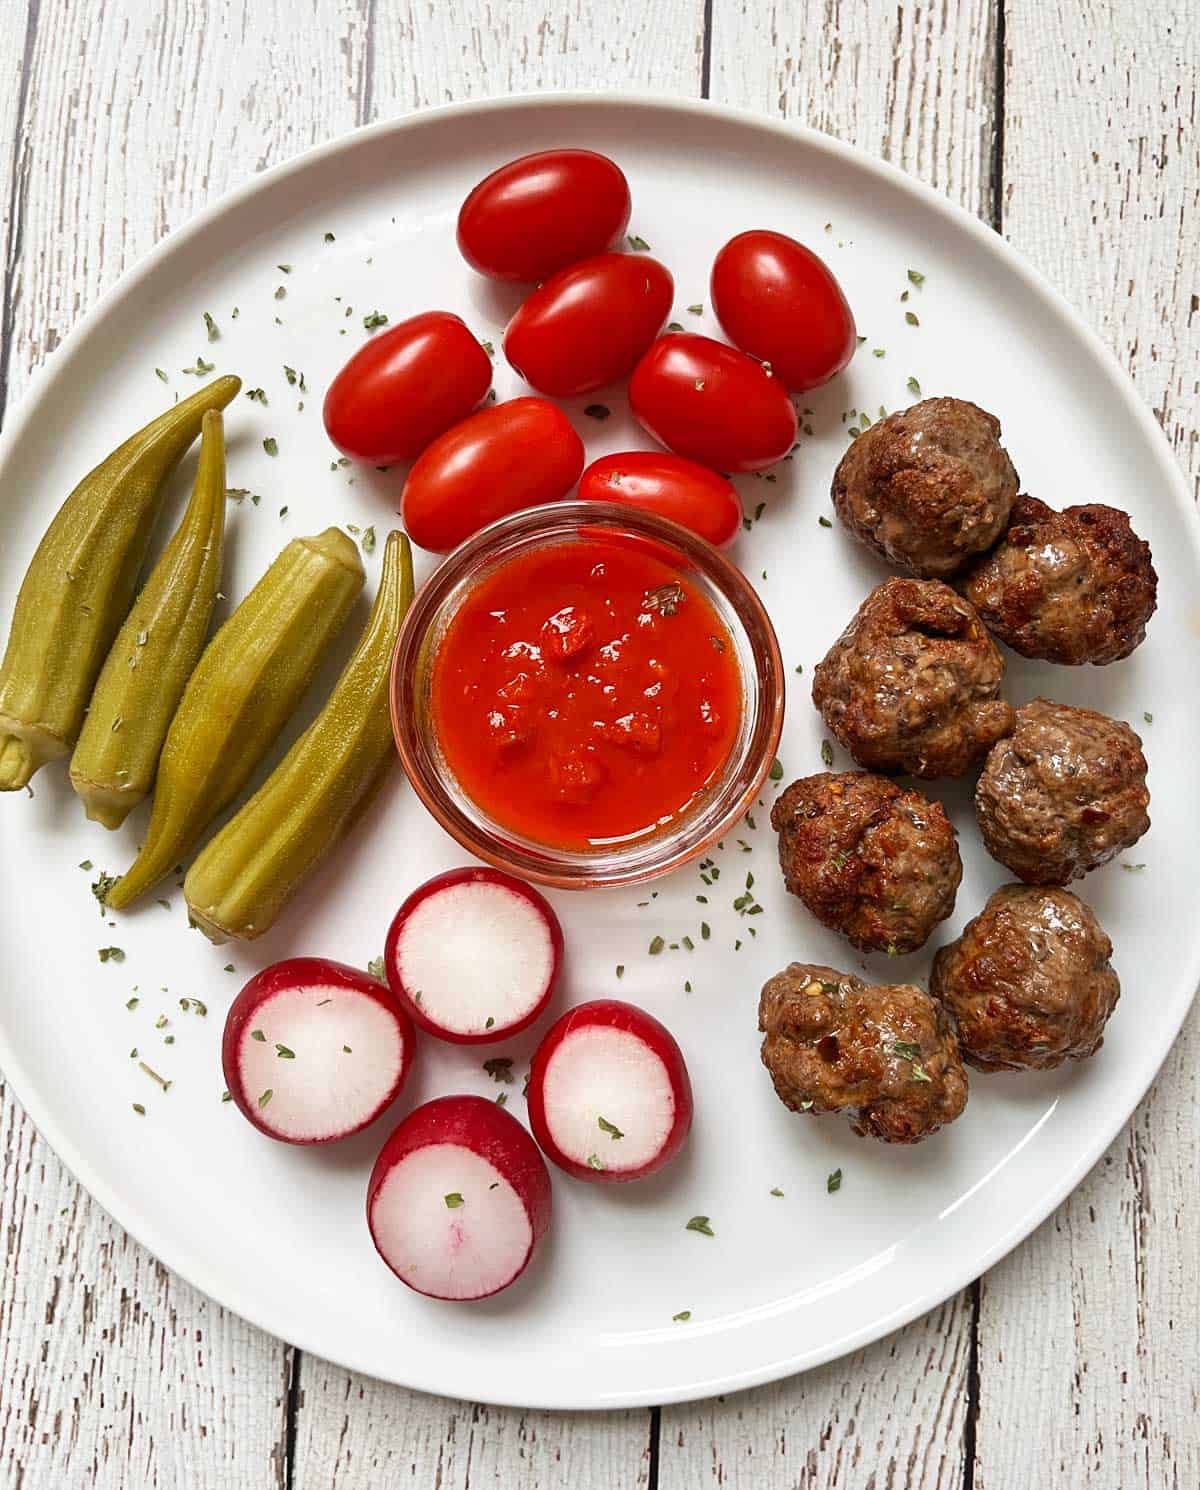 Leftover keto meatballs are served with veggies, pickles, and a dip.